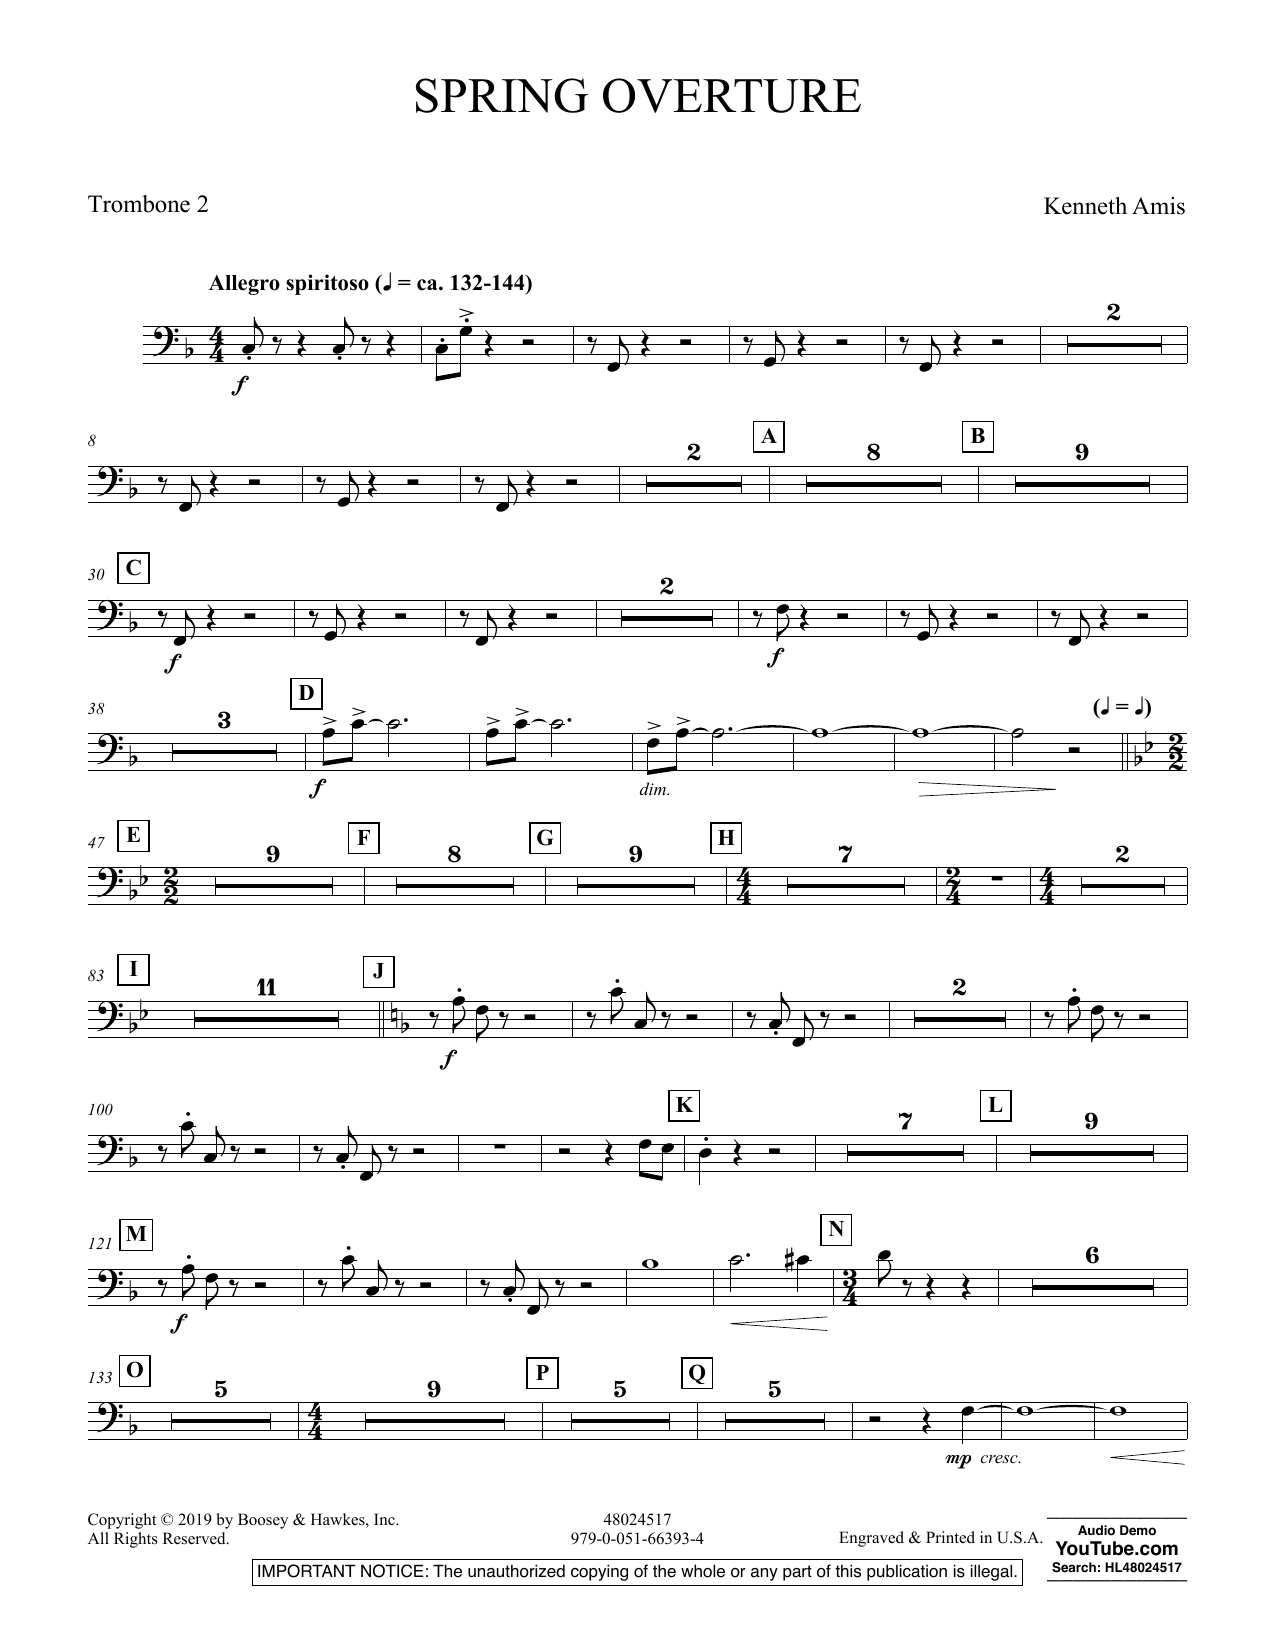 Kenneth Amis Spring Overture - Trombone 2 sheet music preview music notes and score for Concert Band including 2 page(s)